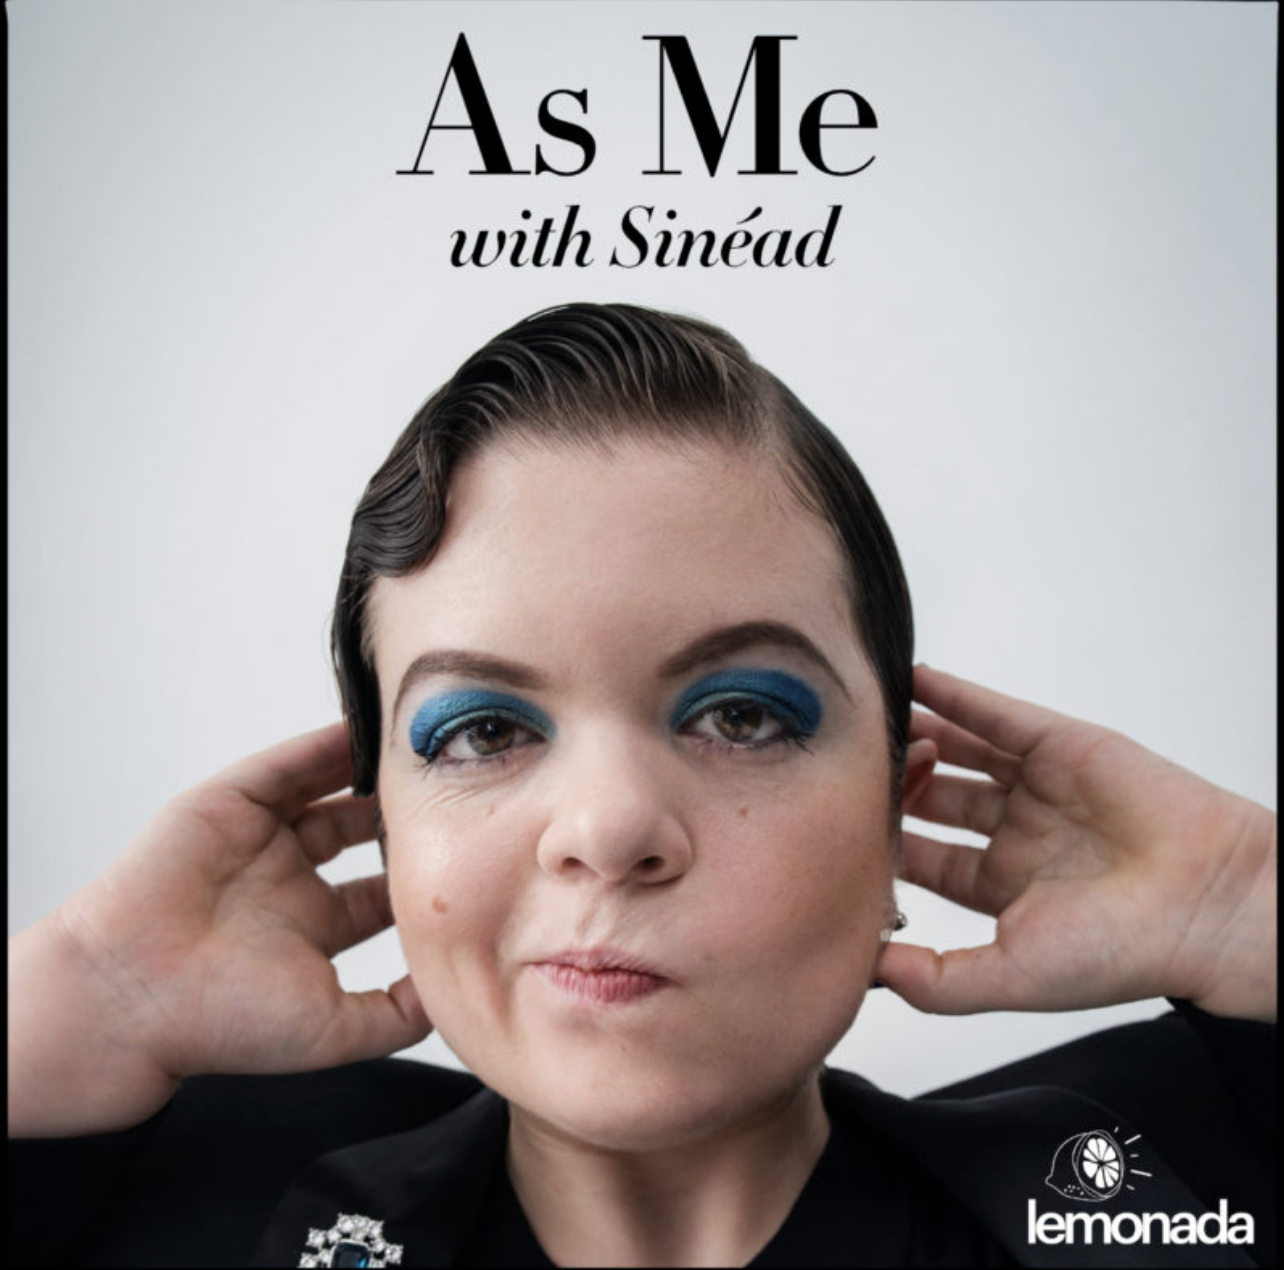 Your-Next-Listen-As-Me-with-Sinead-Podcast-From-Lemonada-Media-Didnt-I-Just-Feed-You